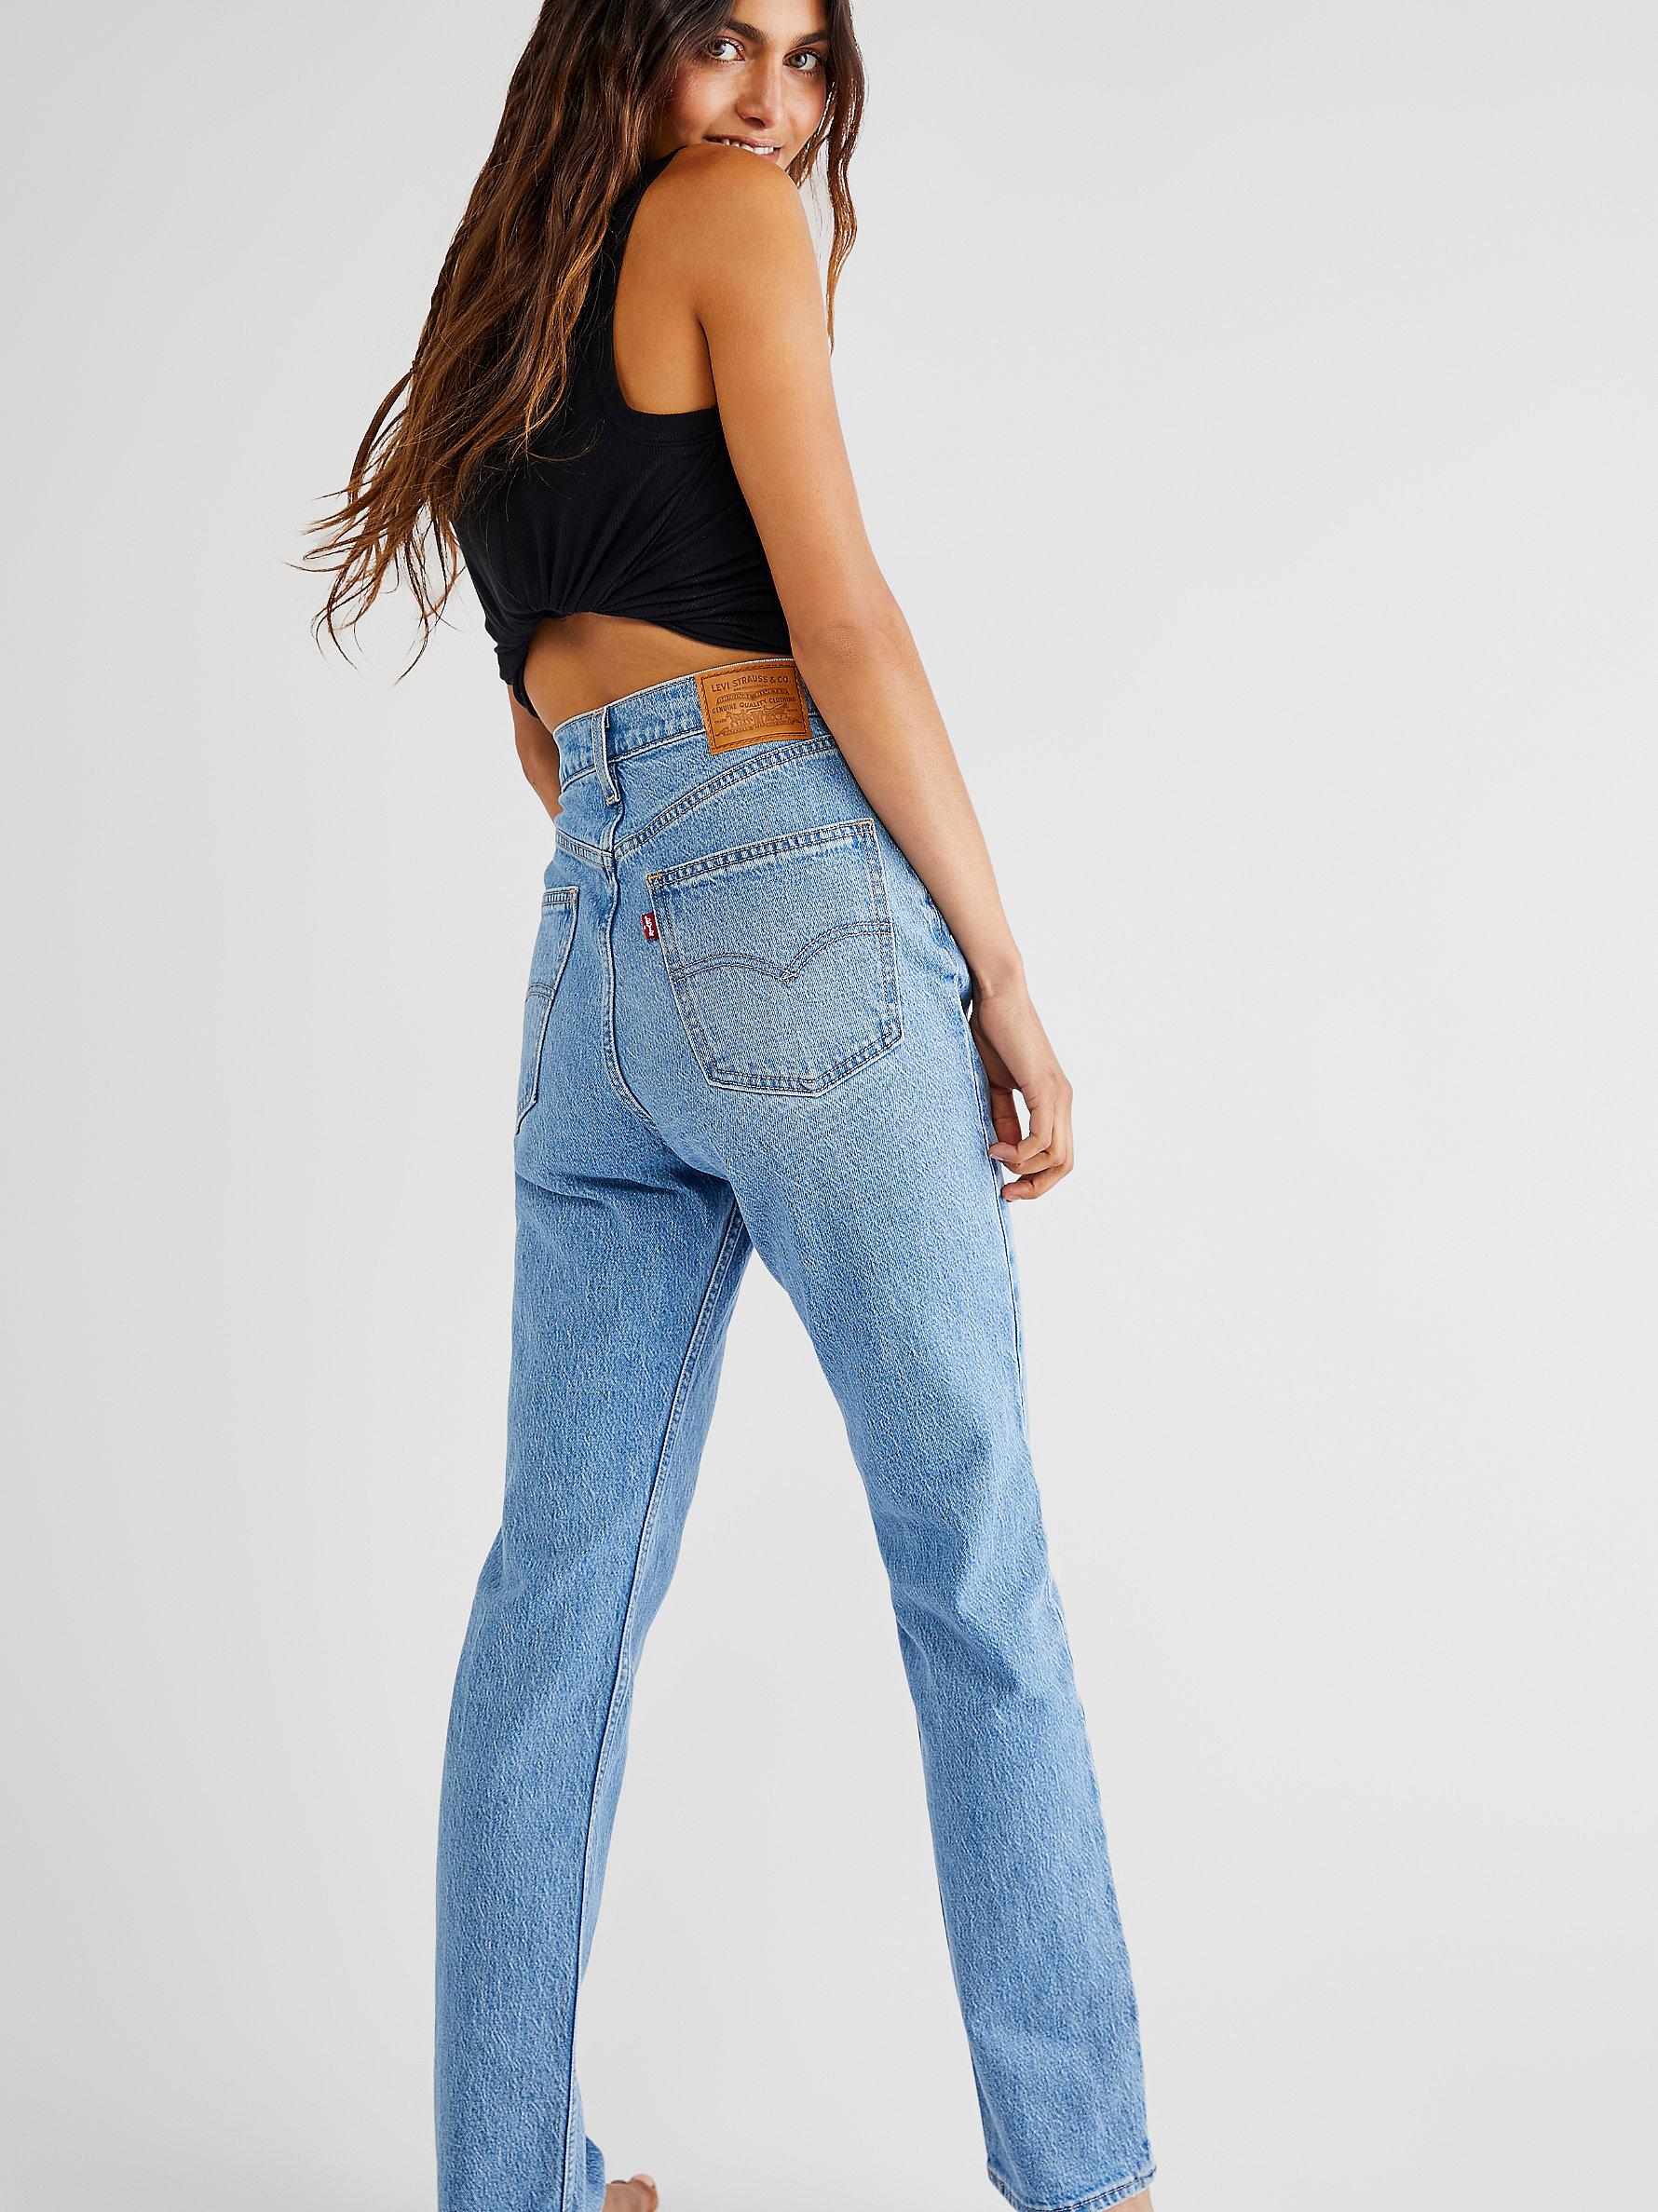 Free People Denim Levi's 70's High Slim Straight Jeans in Blue | Lyst